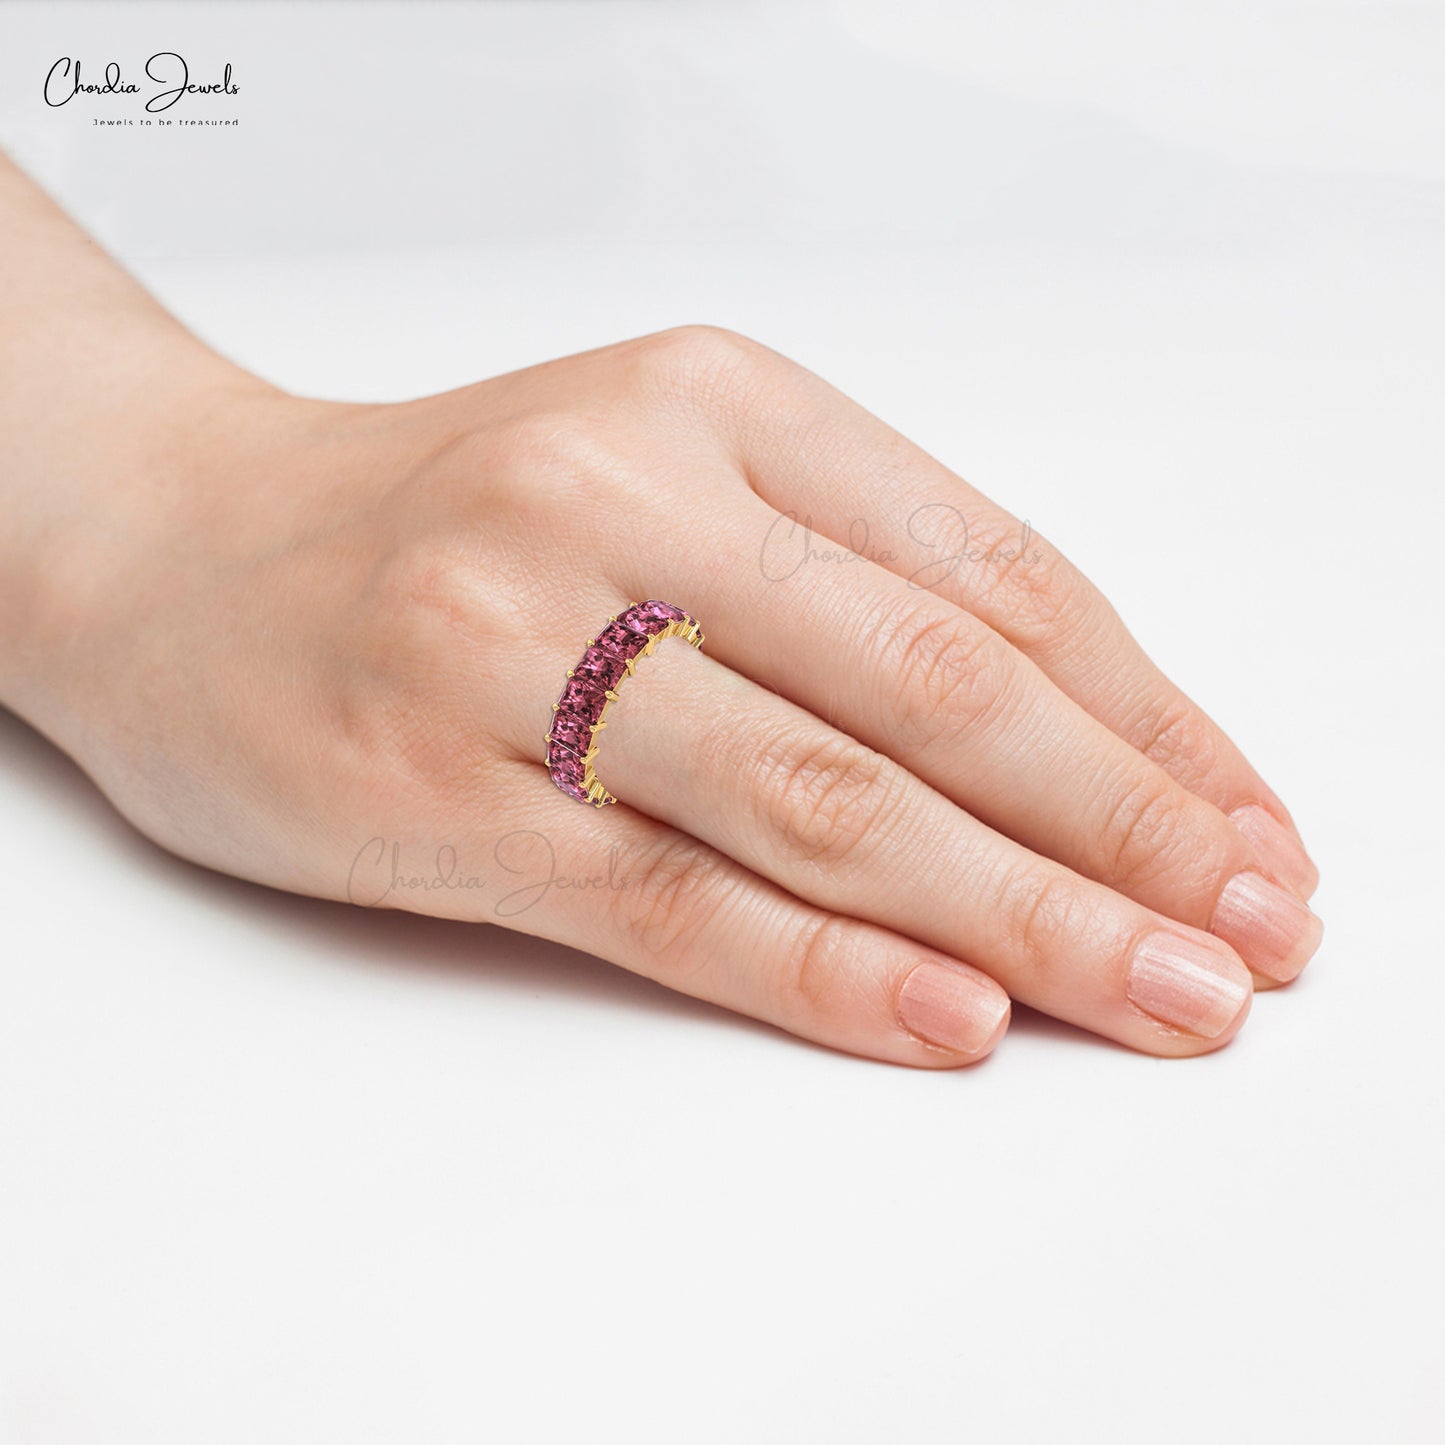 3.36 Carat Natural Pink Tourmaline Half Eternity Band For Her, 14k Solid Gold Gemstone Band For Wedding Gift